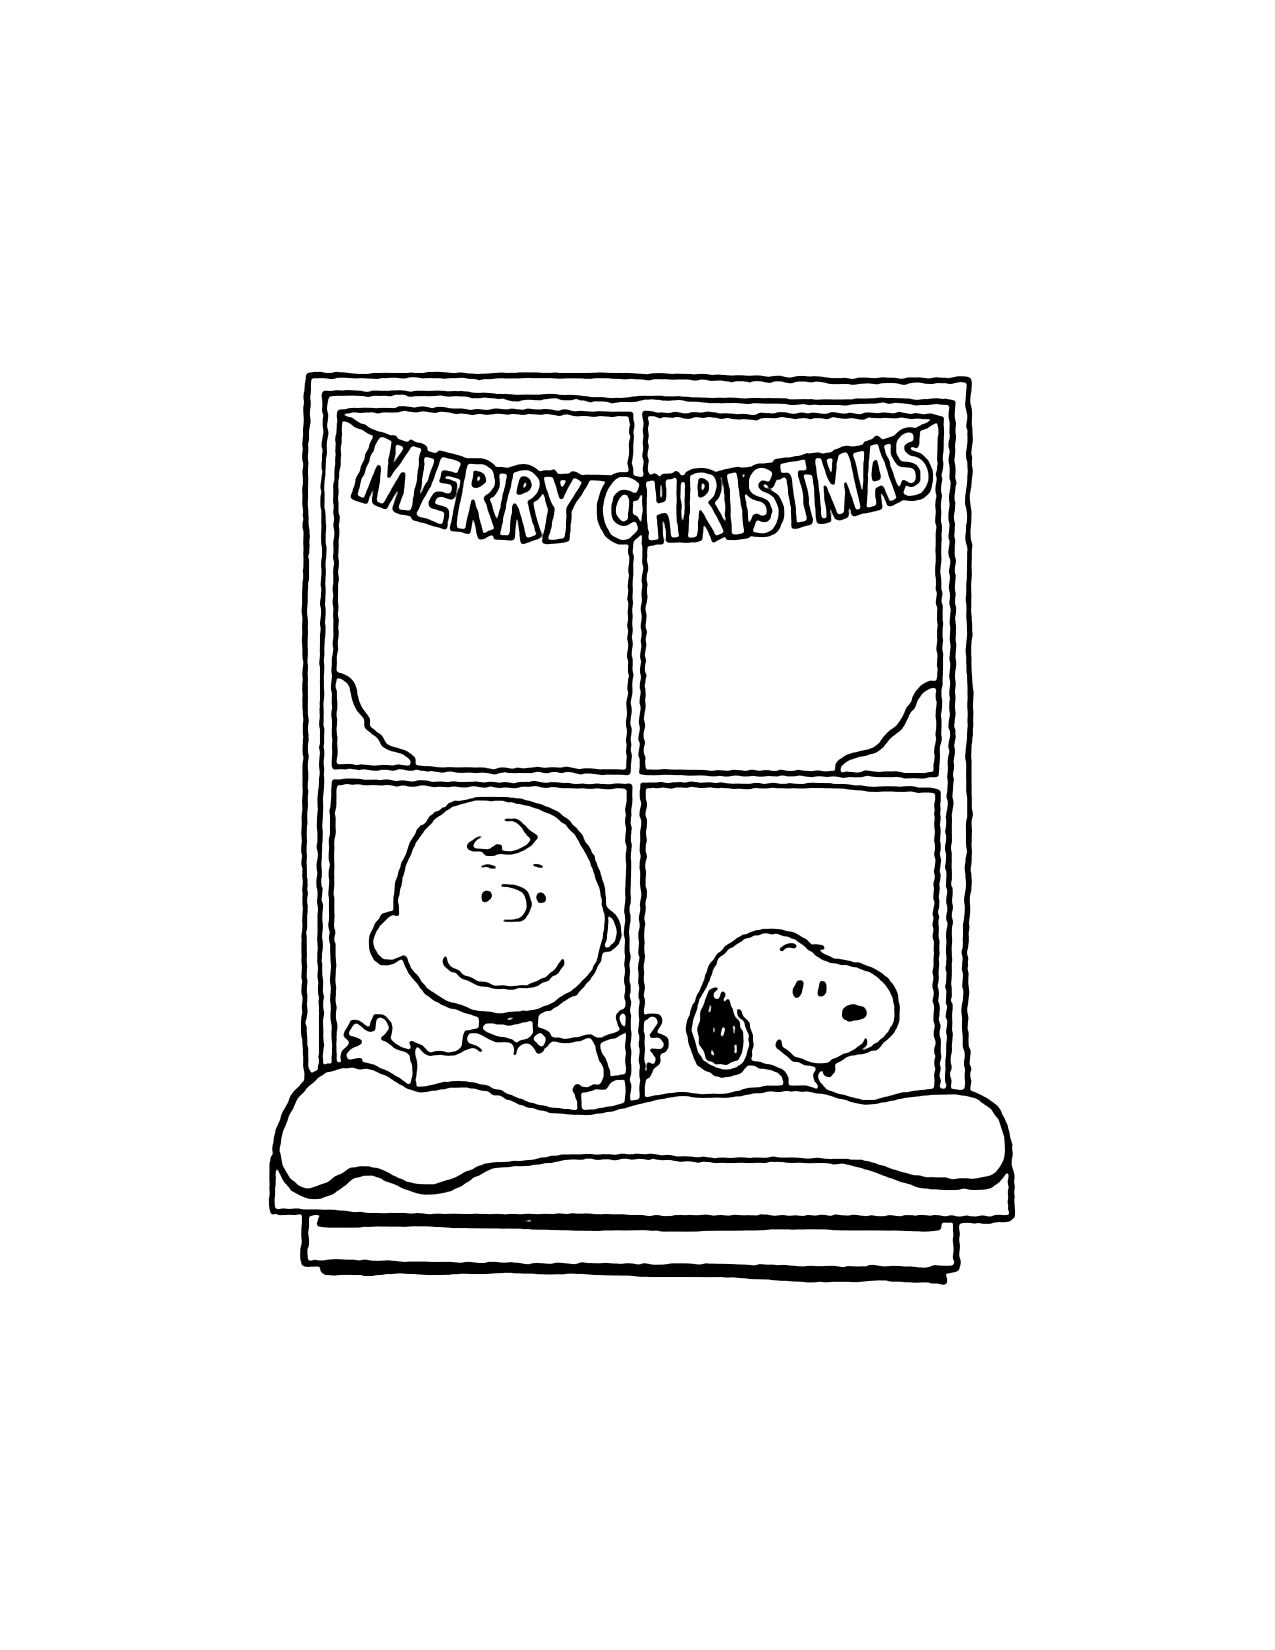 Merry Christmas Charlie Brown Coloring Page